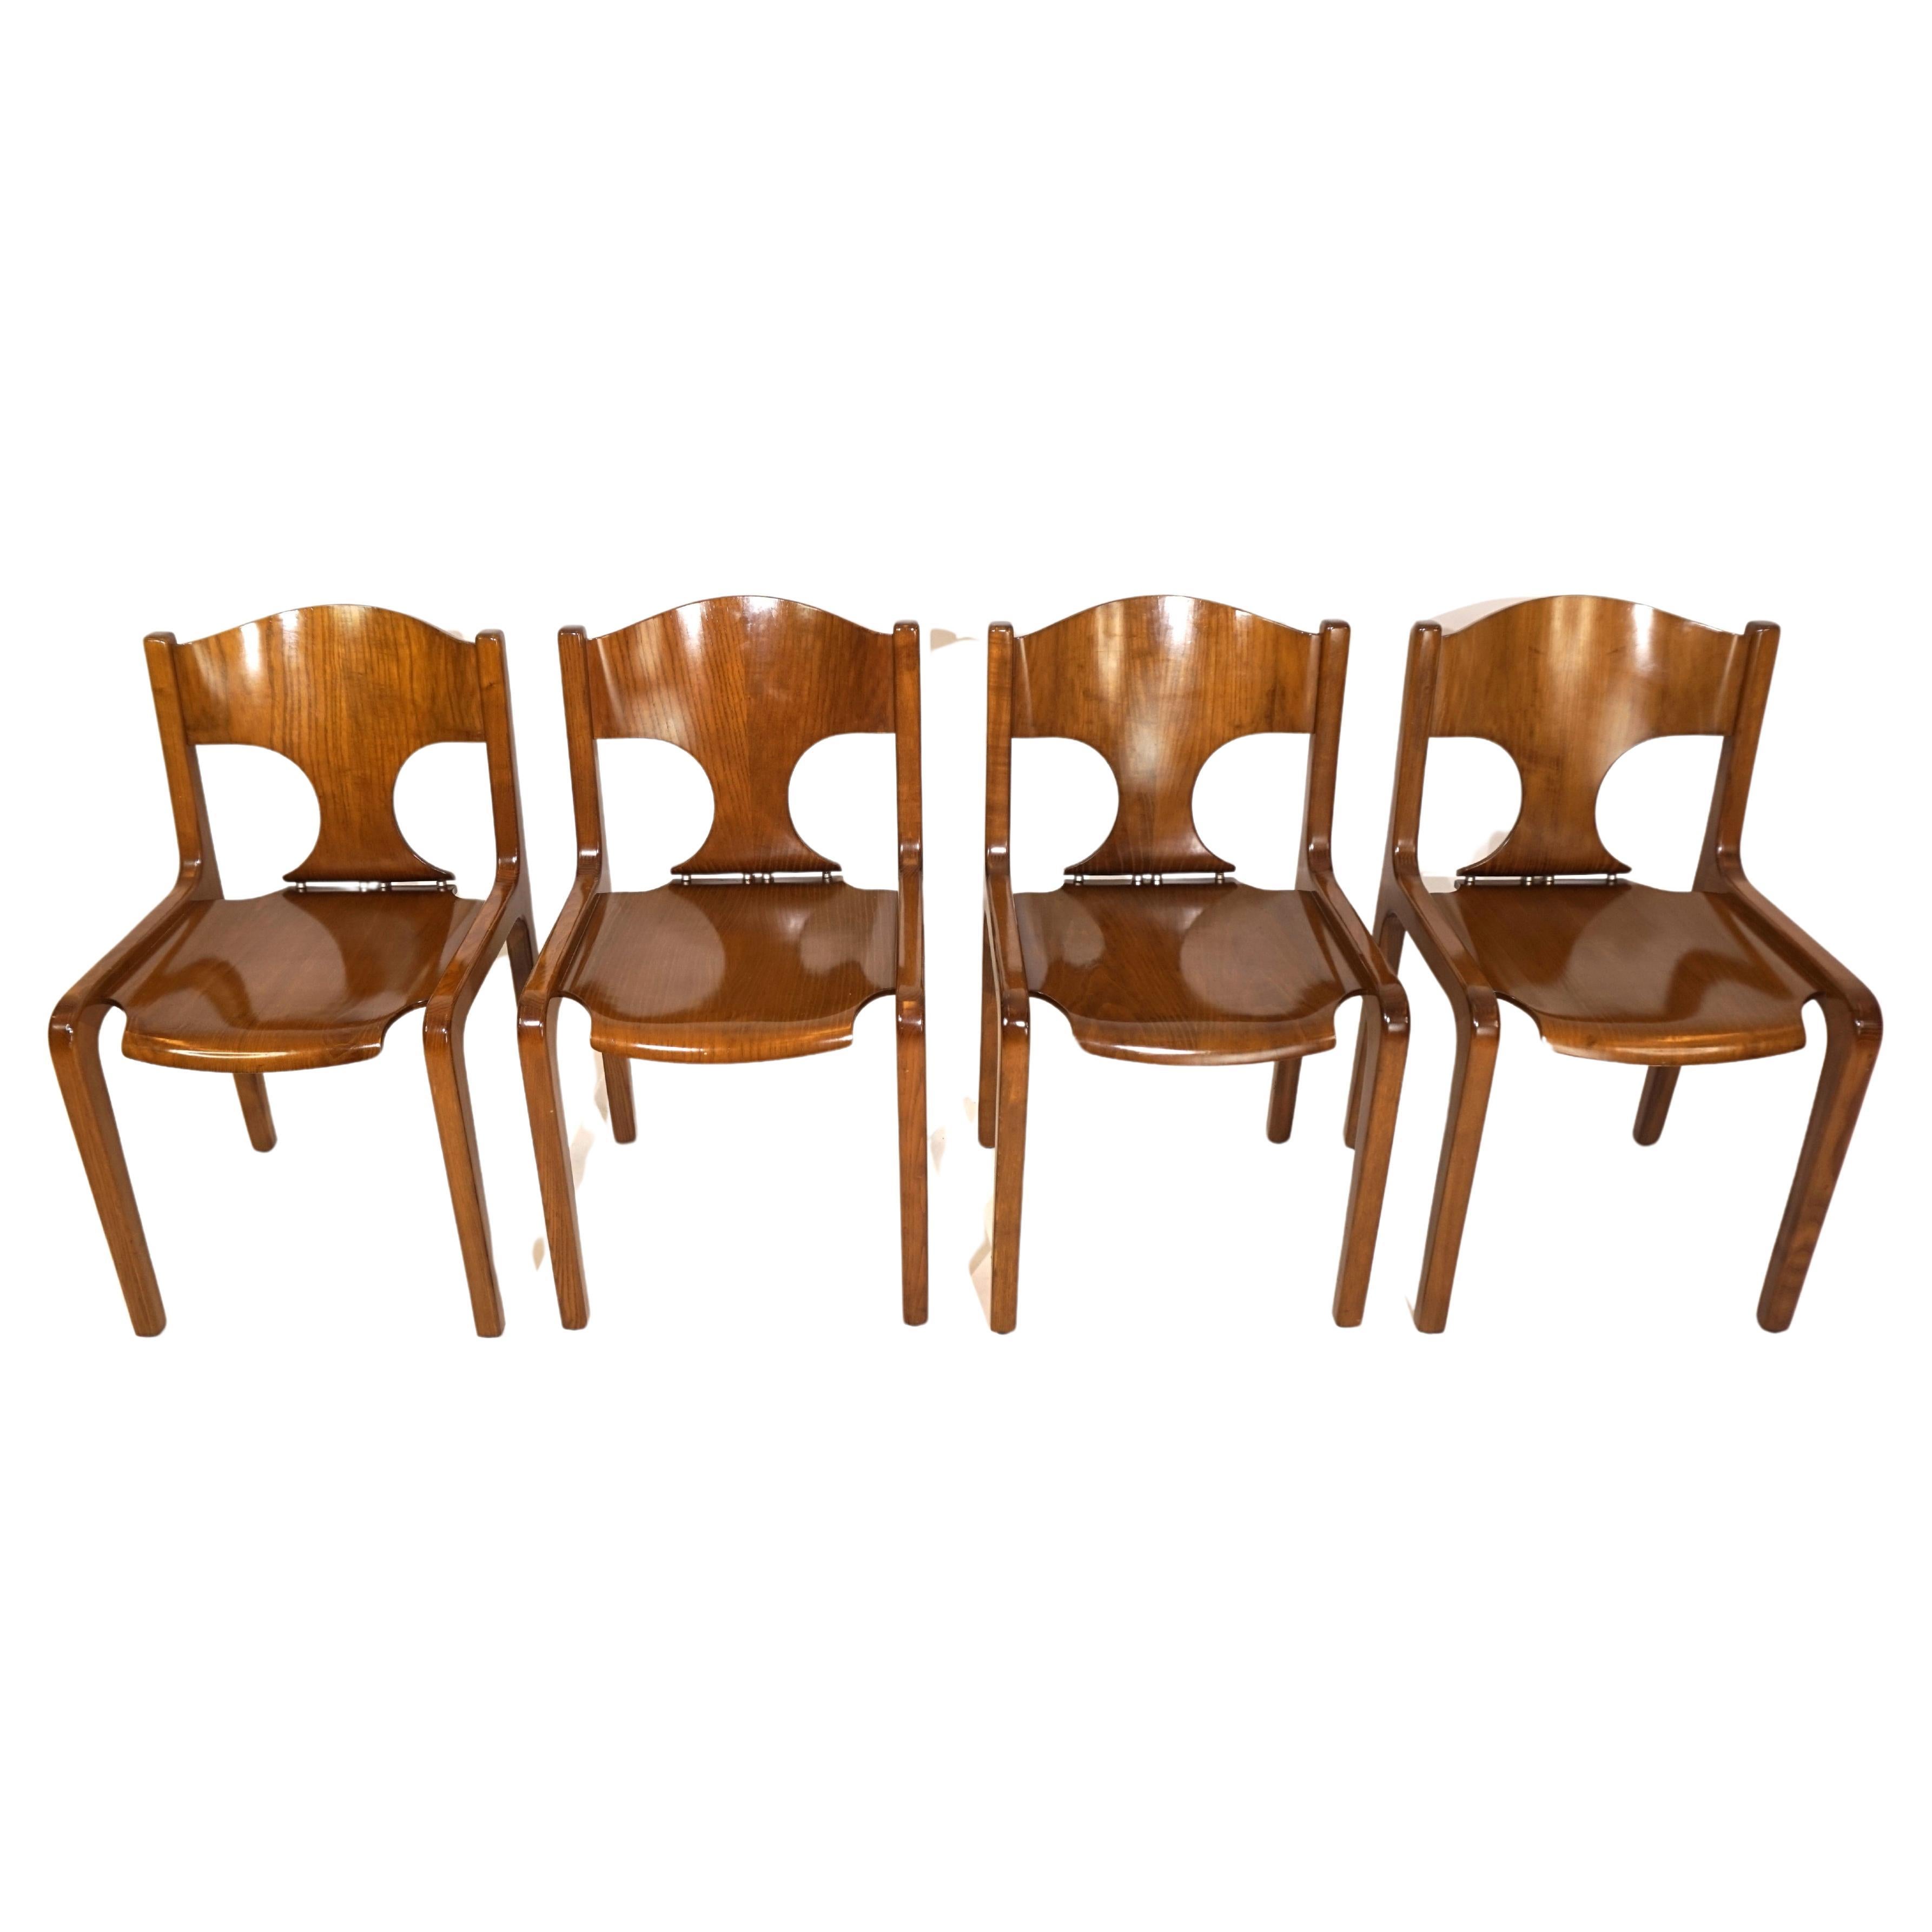 Pozzi dining chairs set of 4 by Augusto Savini For Sale